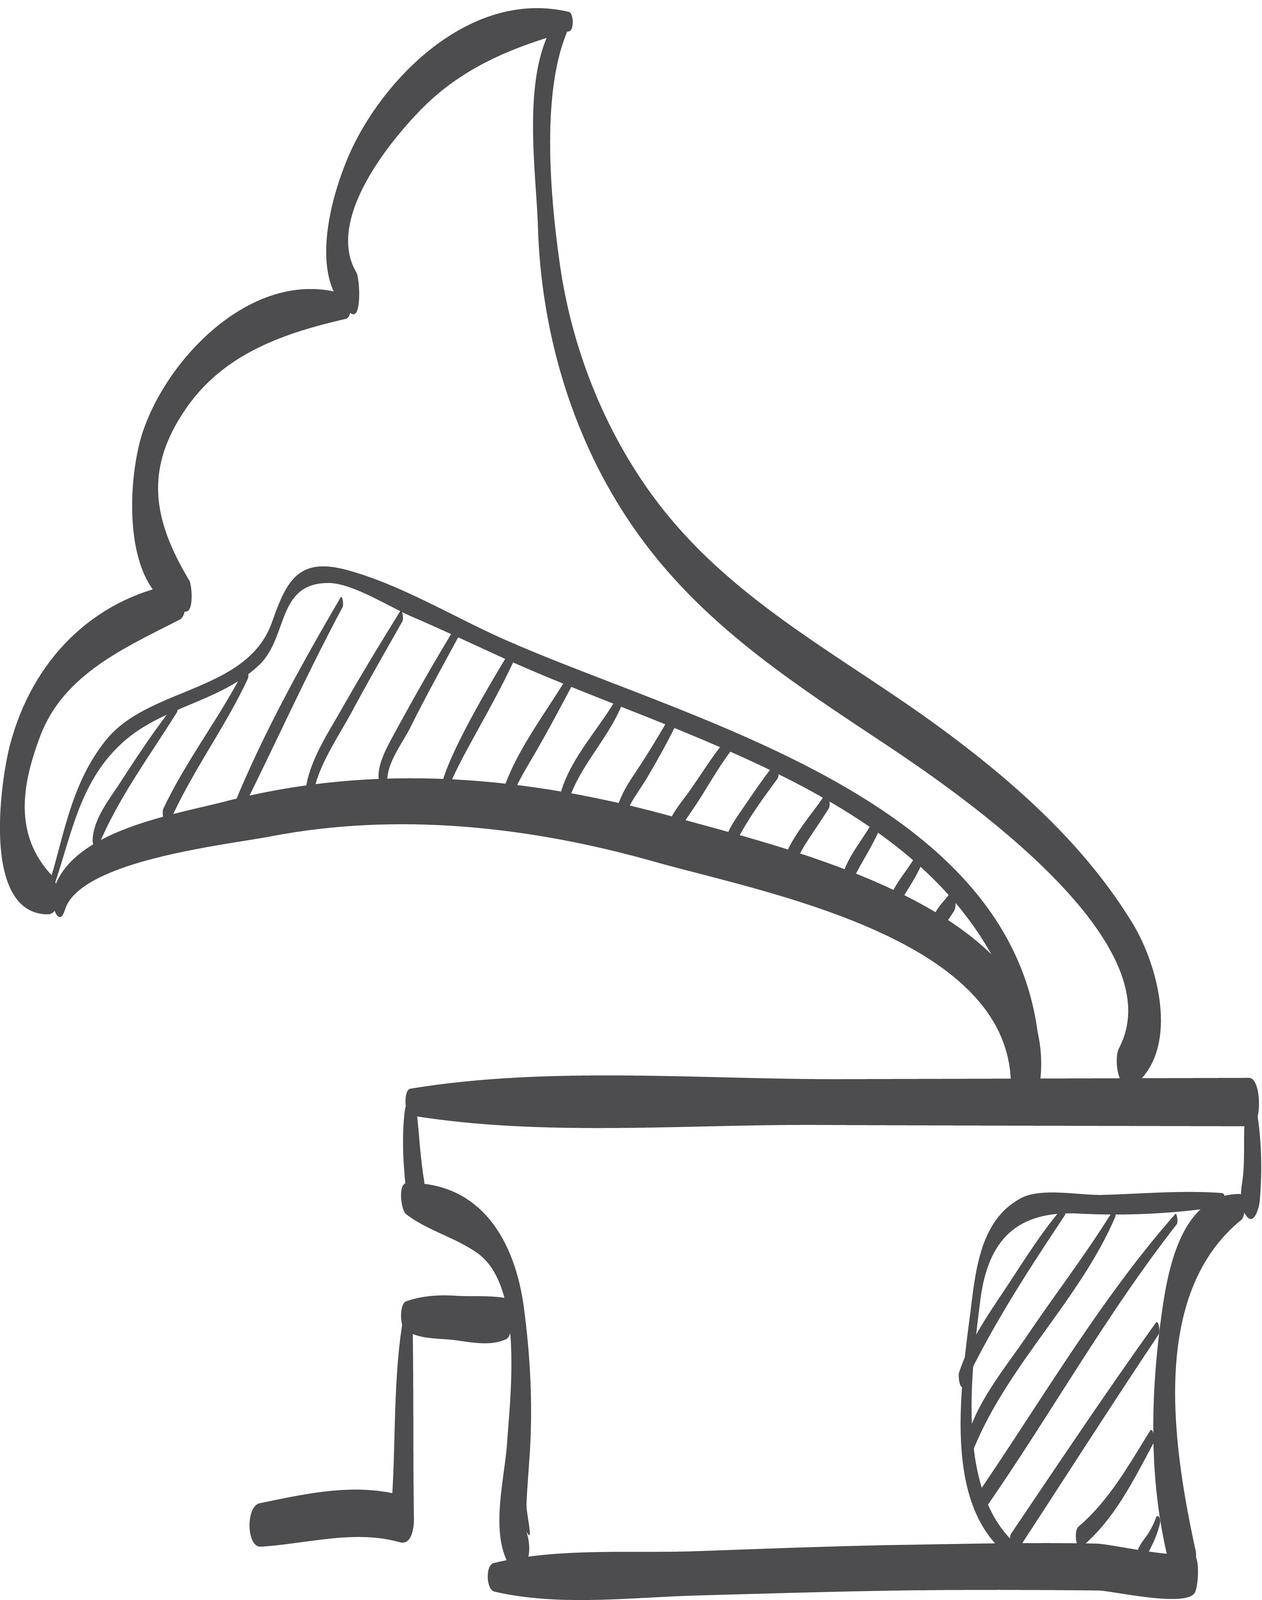 Sketch icon - Gramophone by puruan